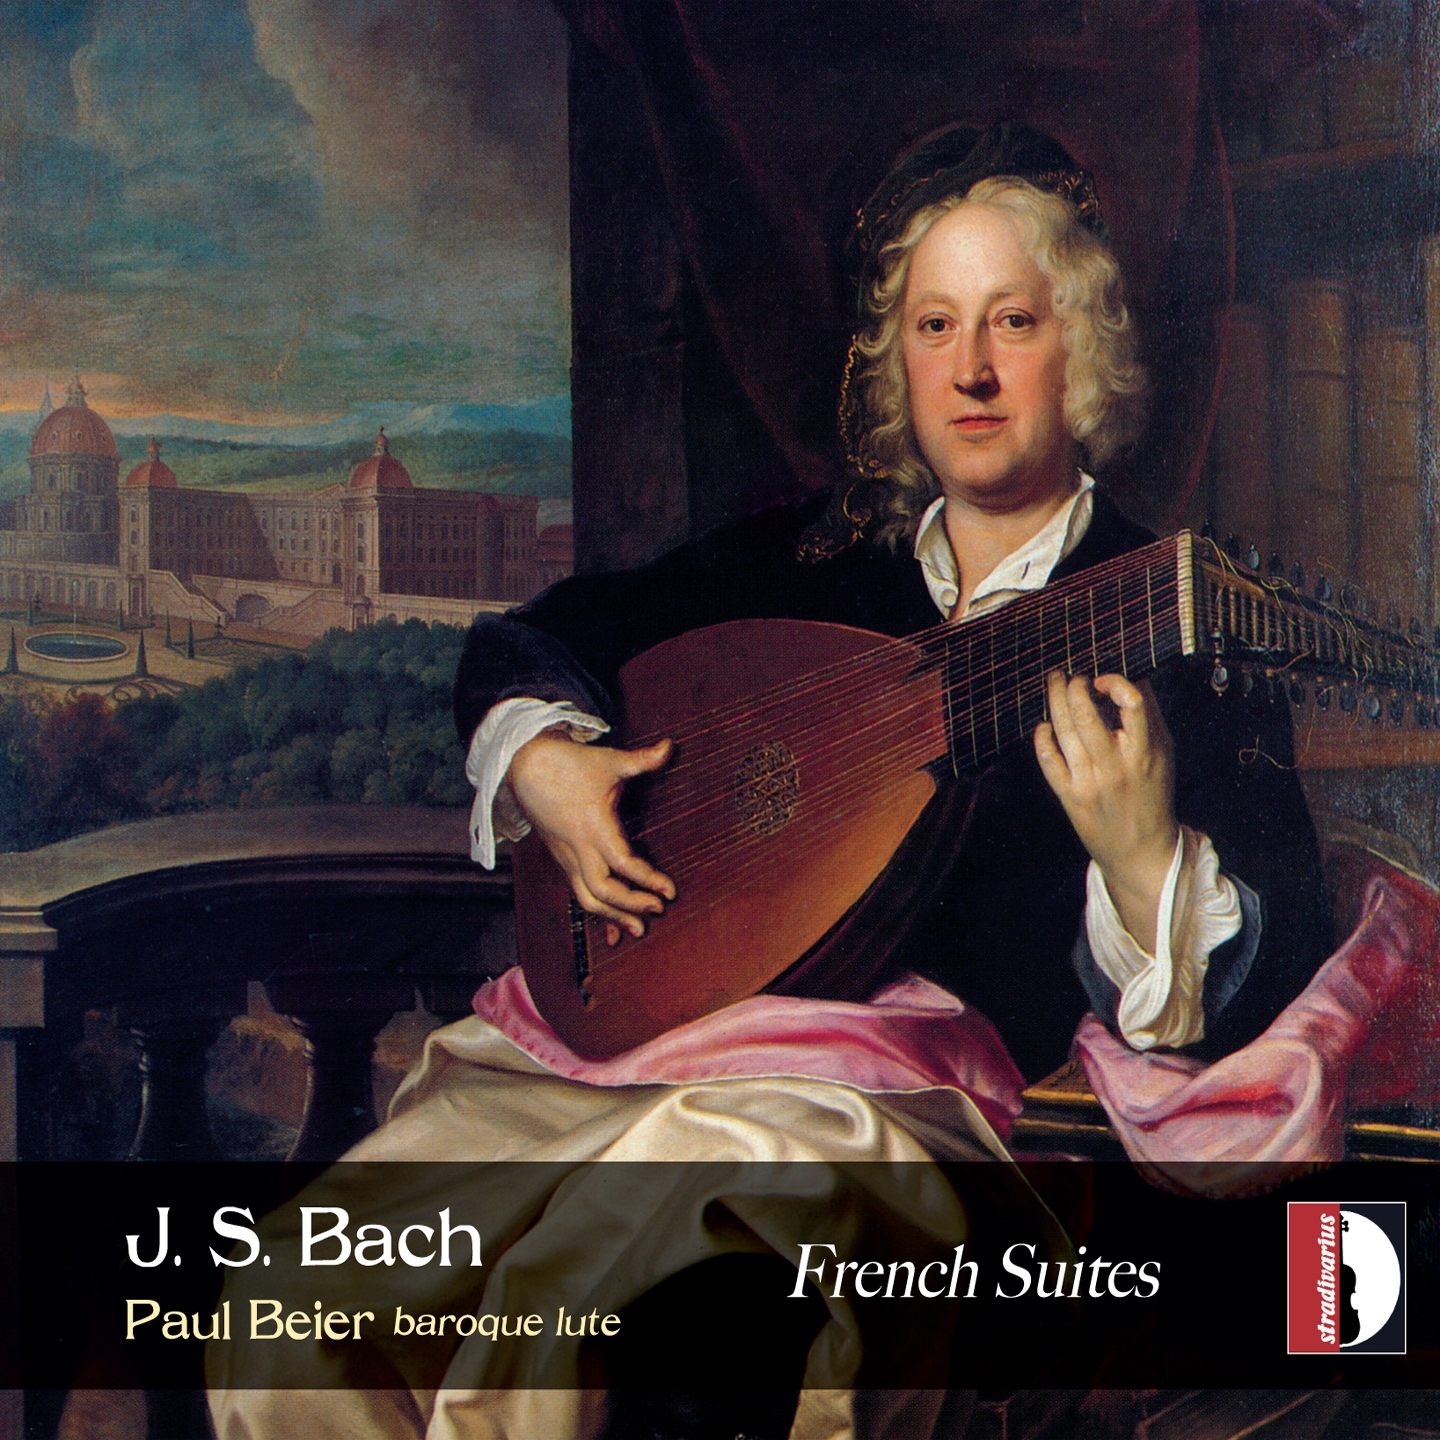 6 French Suites, No. 3 in B-Flat Minor, BWV 814: IV. Menuets I & II (Transcription for Lute)